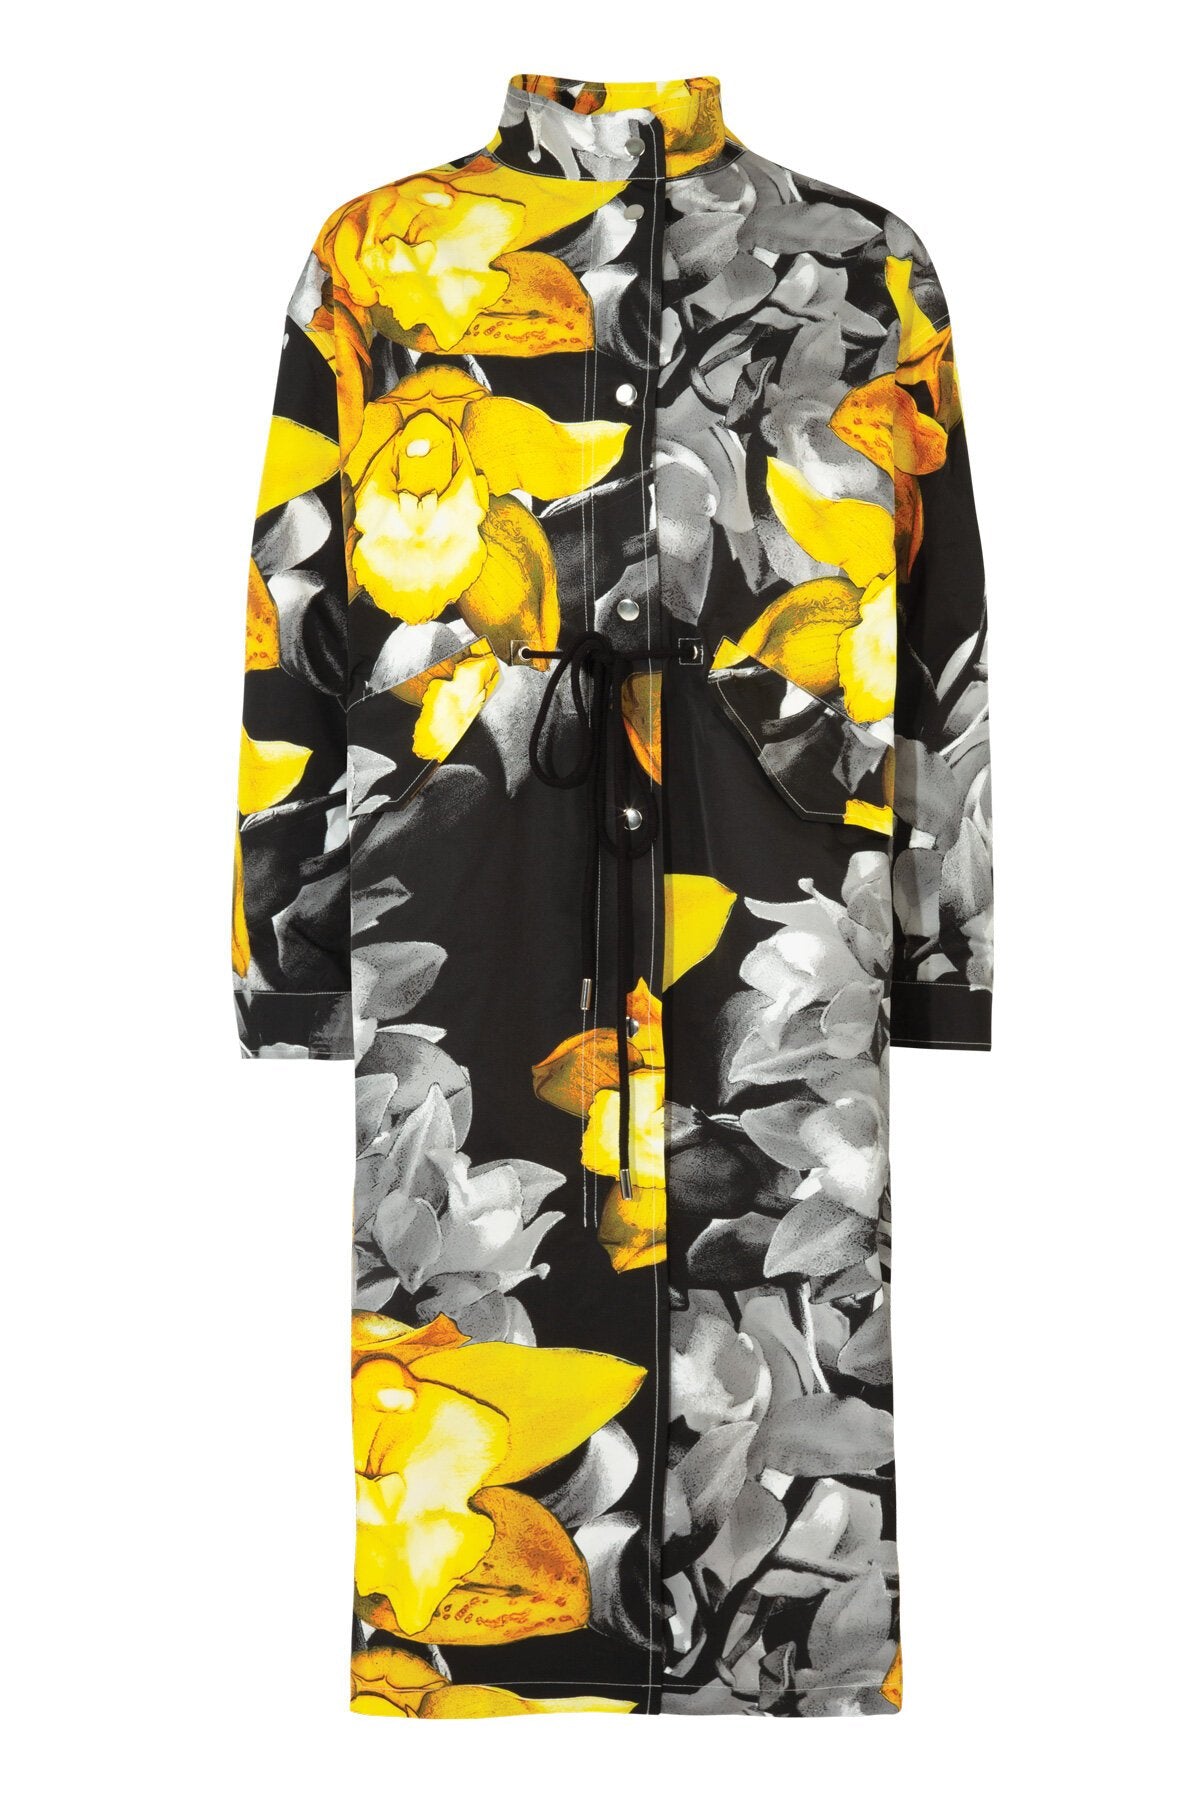 CURATE YOU CAN'T PARKER HERE COAT - YELLOW - THE VOGUE STORE